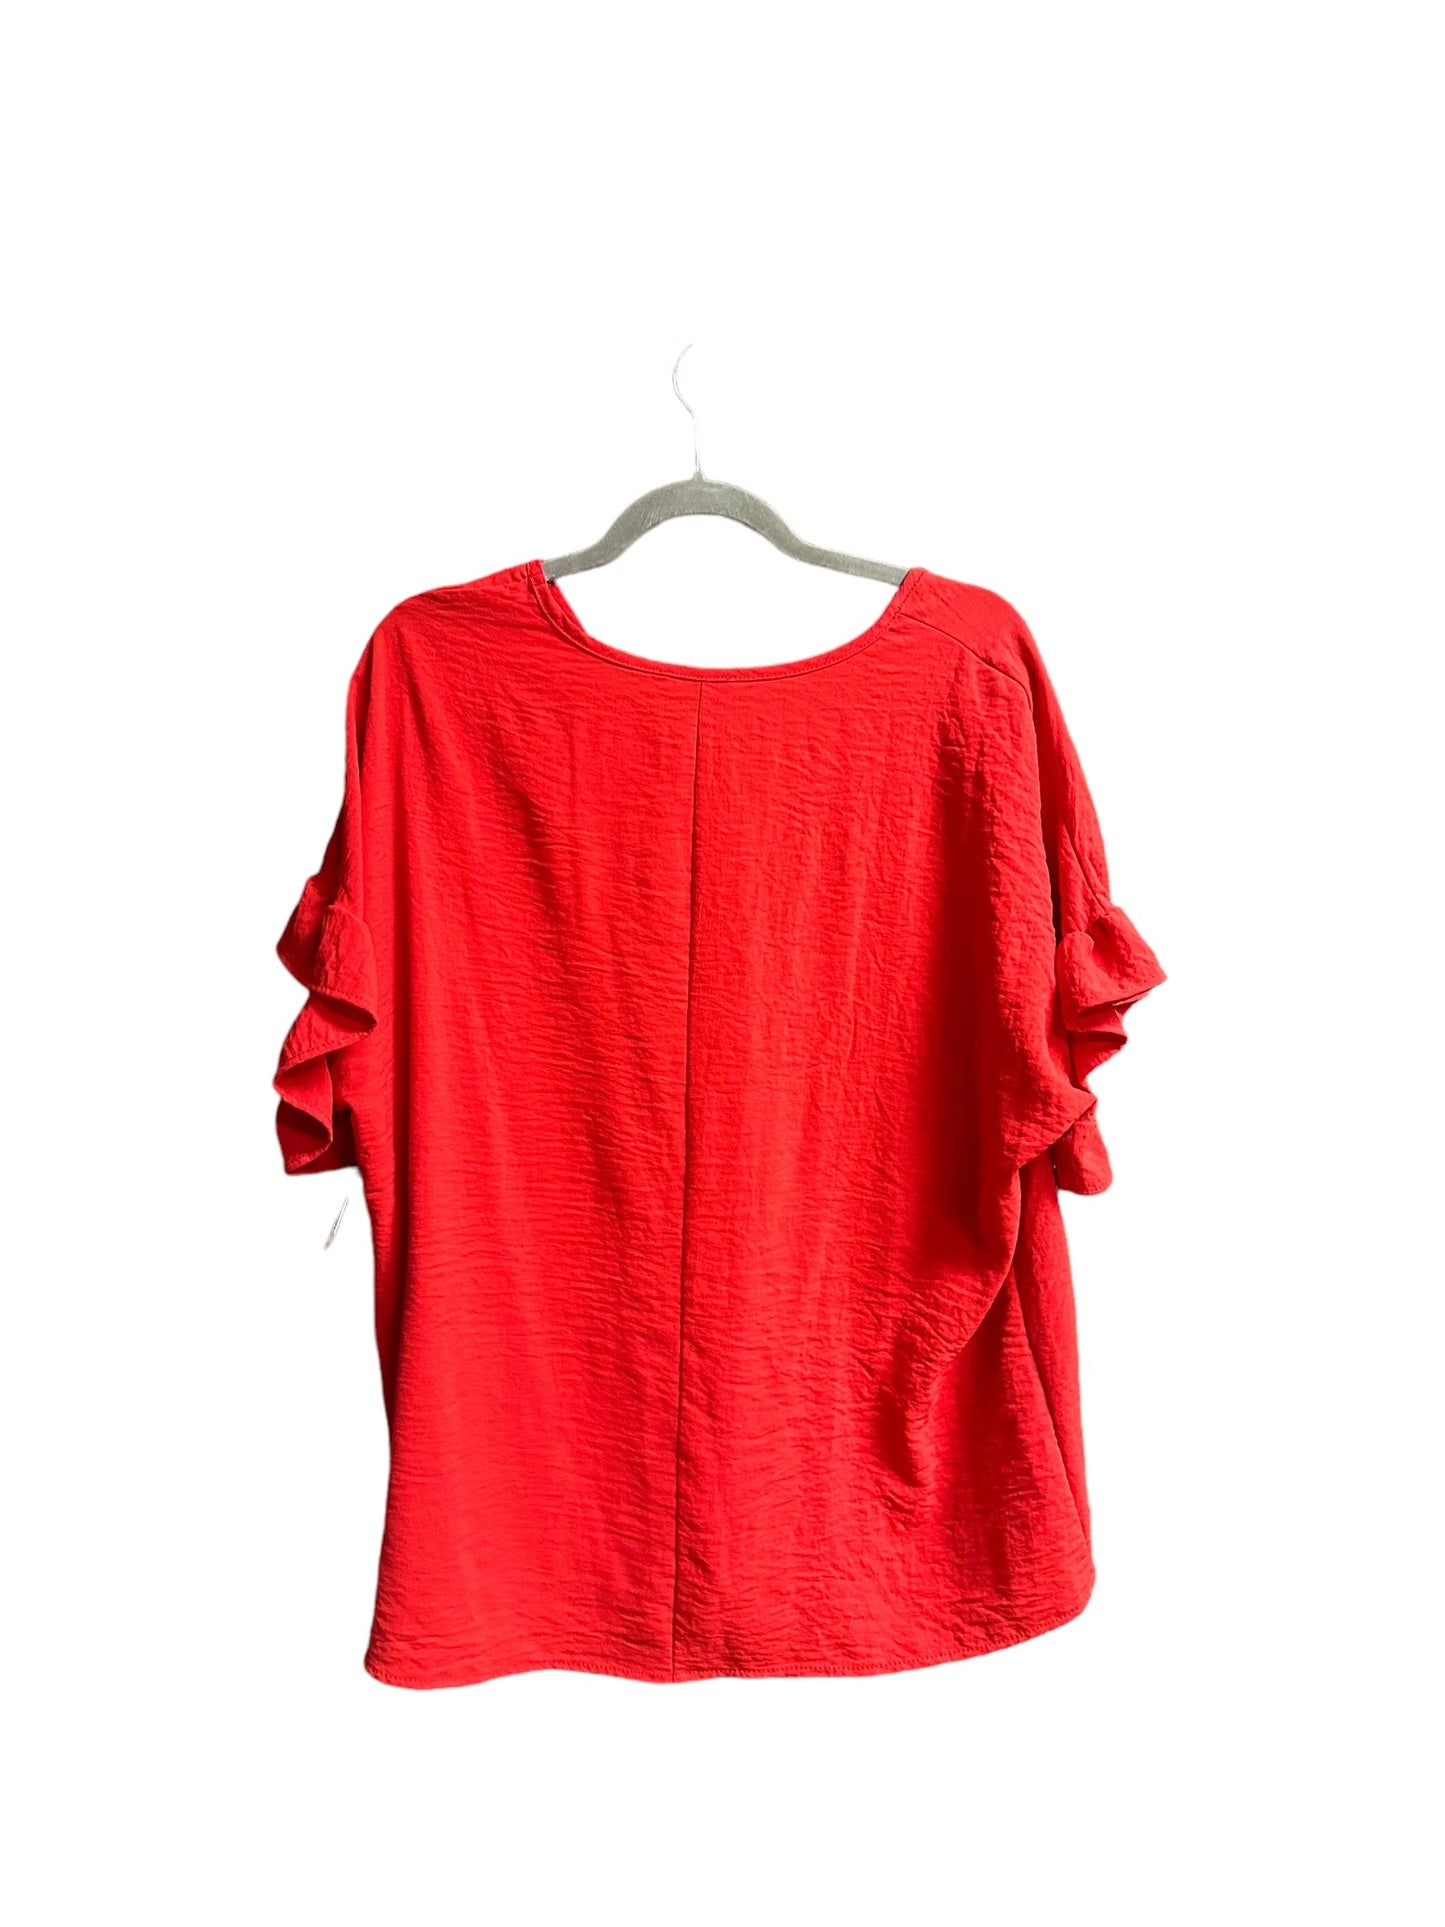 Red Top Short Sleeve Entro, Size M